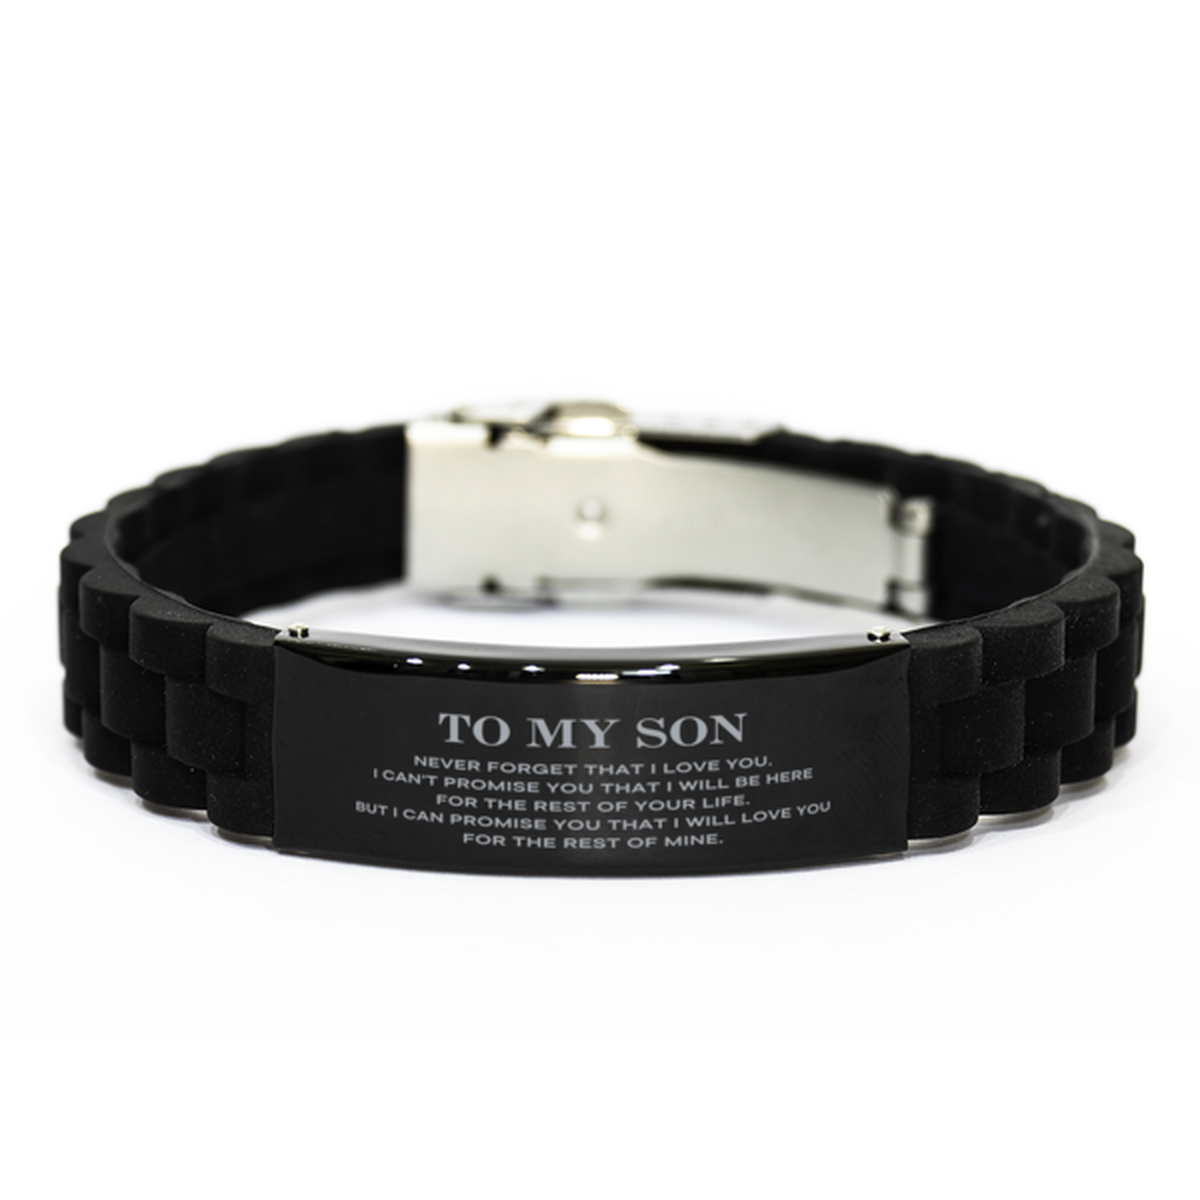 To My Son Gifts, I will love you for the rest of mine, Love Son Bracelet, Birthday Christmas Unique Black Glidelock Clasp Bracelet For Son